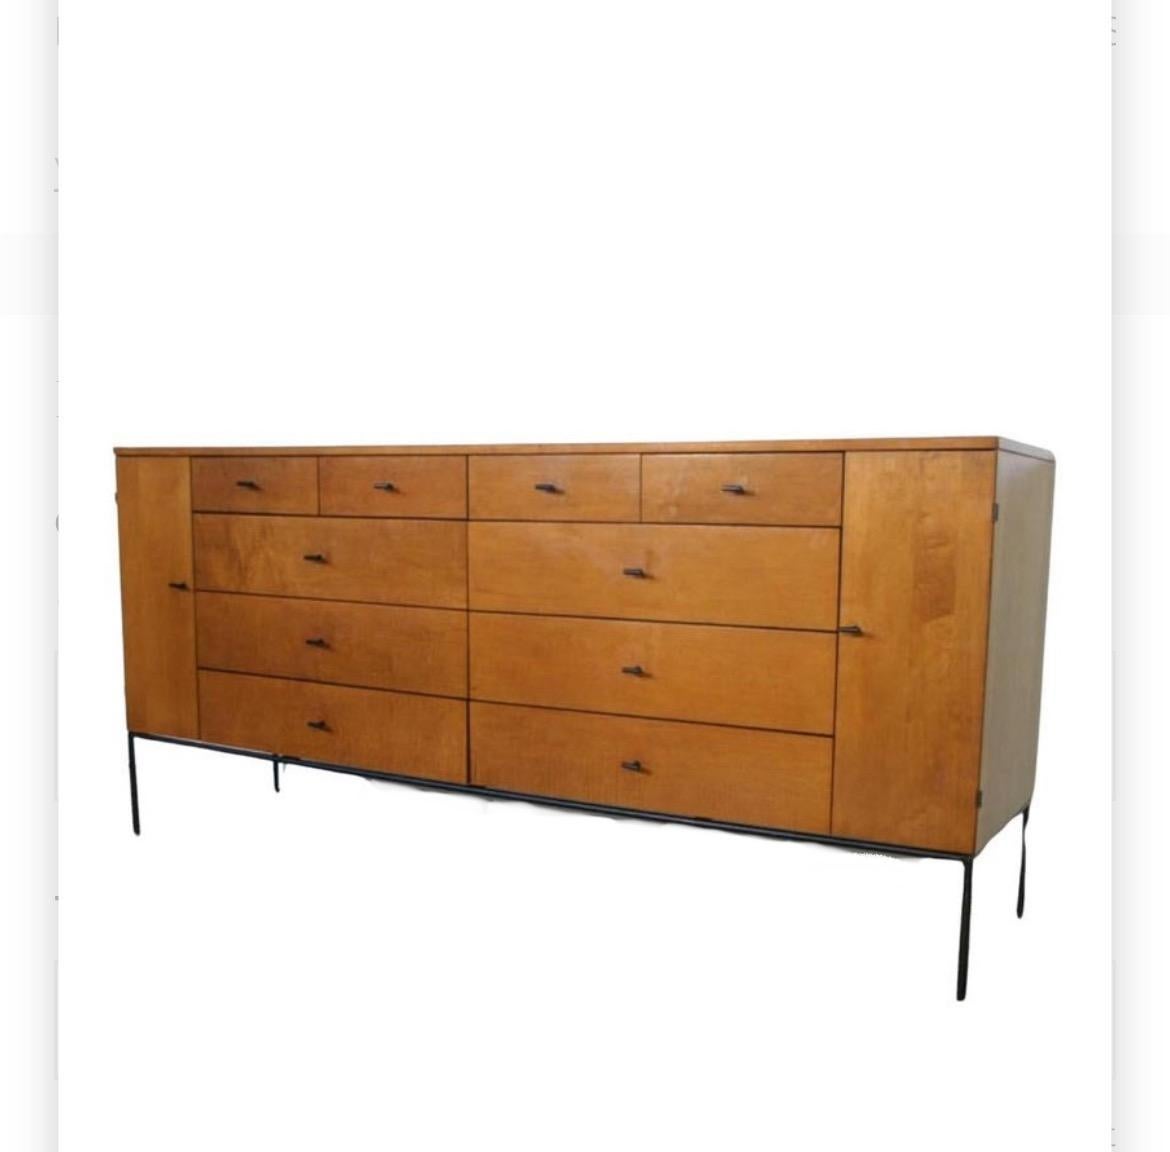 Midcentury Paul McCobb Maple 20 Drawer Dresser #1510 blonde Finish T Pulls In Good Condition For Sale In BROOKLYN, NY